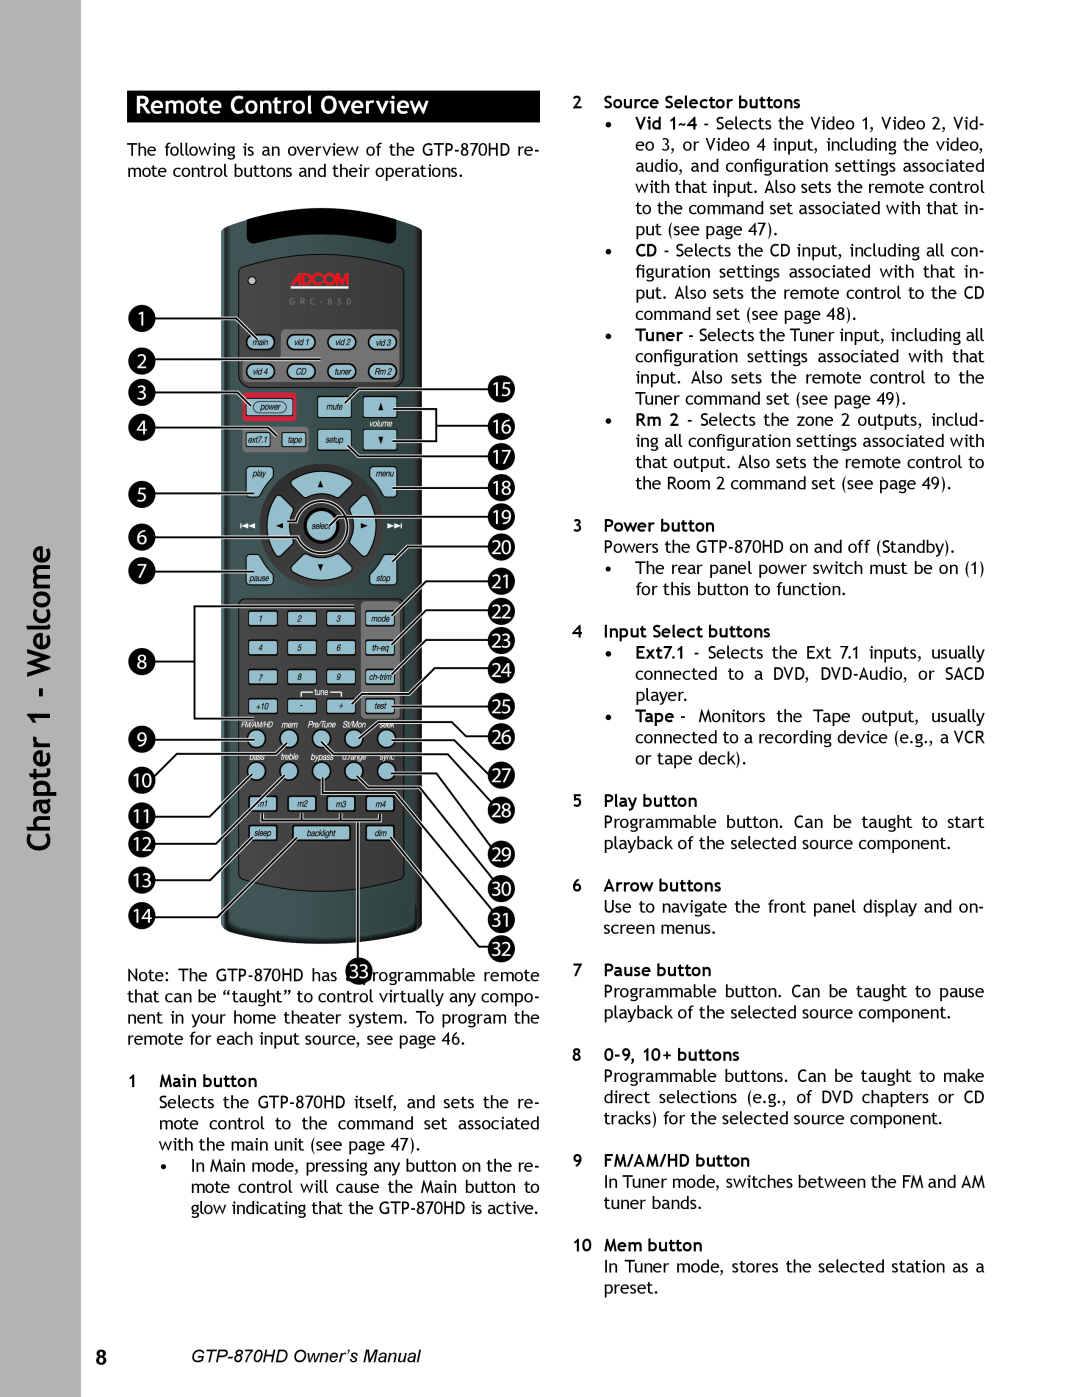 Adcom GTP-870HD Remote Control Overview, 1Main button, 2Source Selector buttons, 3Power button, 4Input Select buttons 